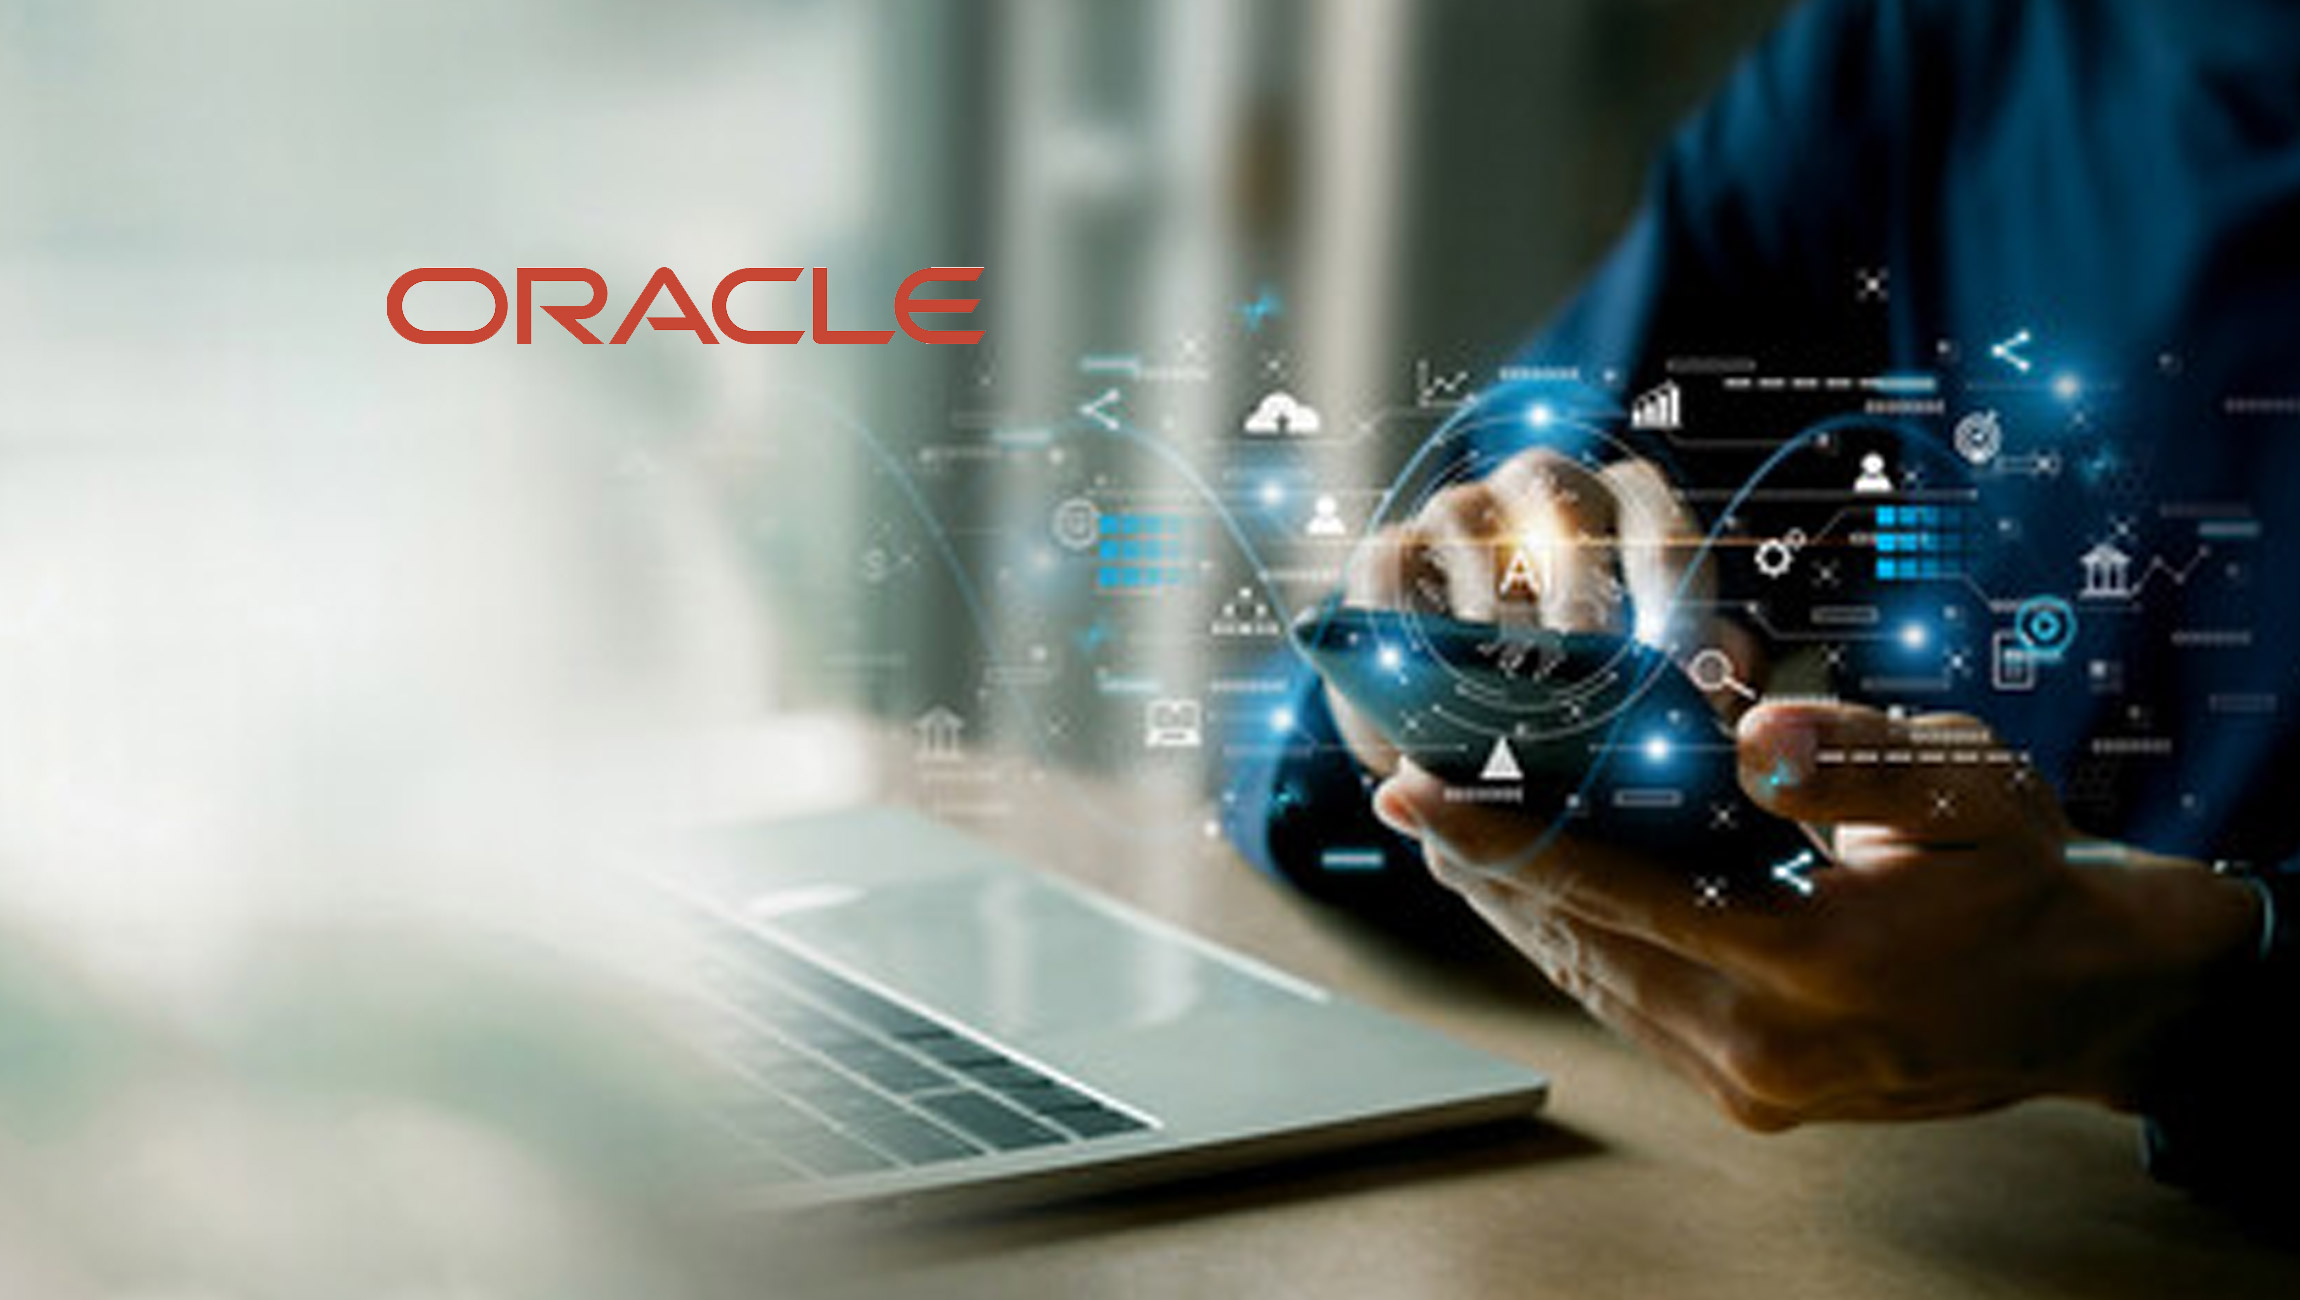 Customers Improve Productivity and Reduce Risk with New Oracle Primavera Cloud Capabilities